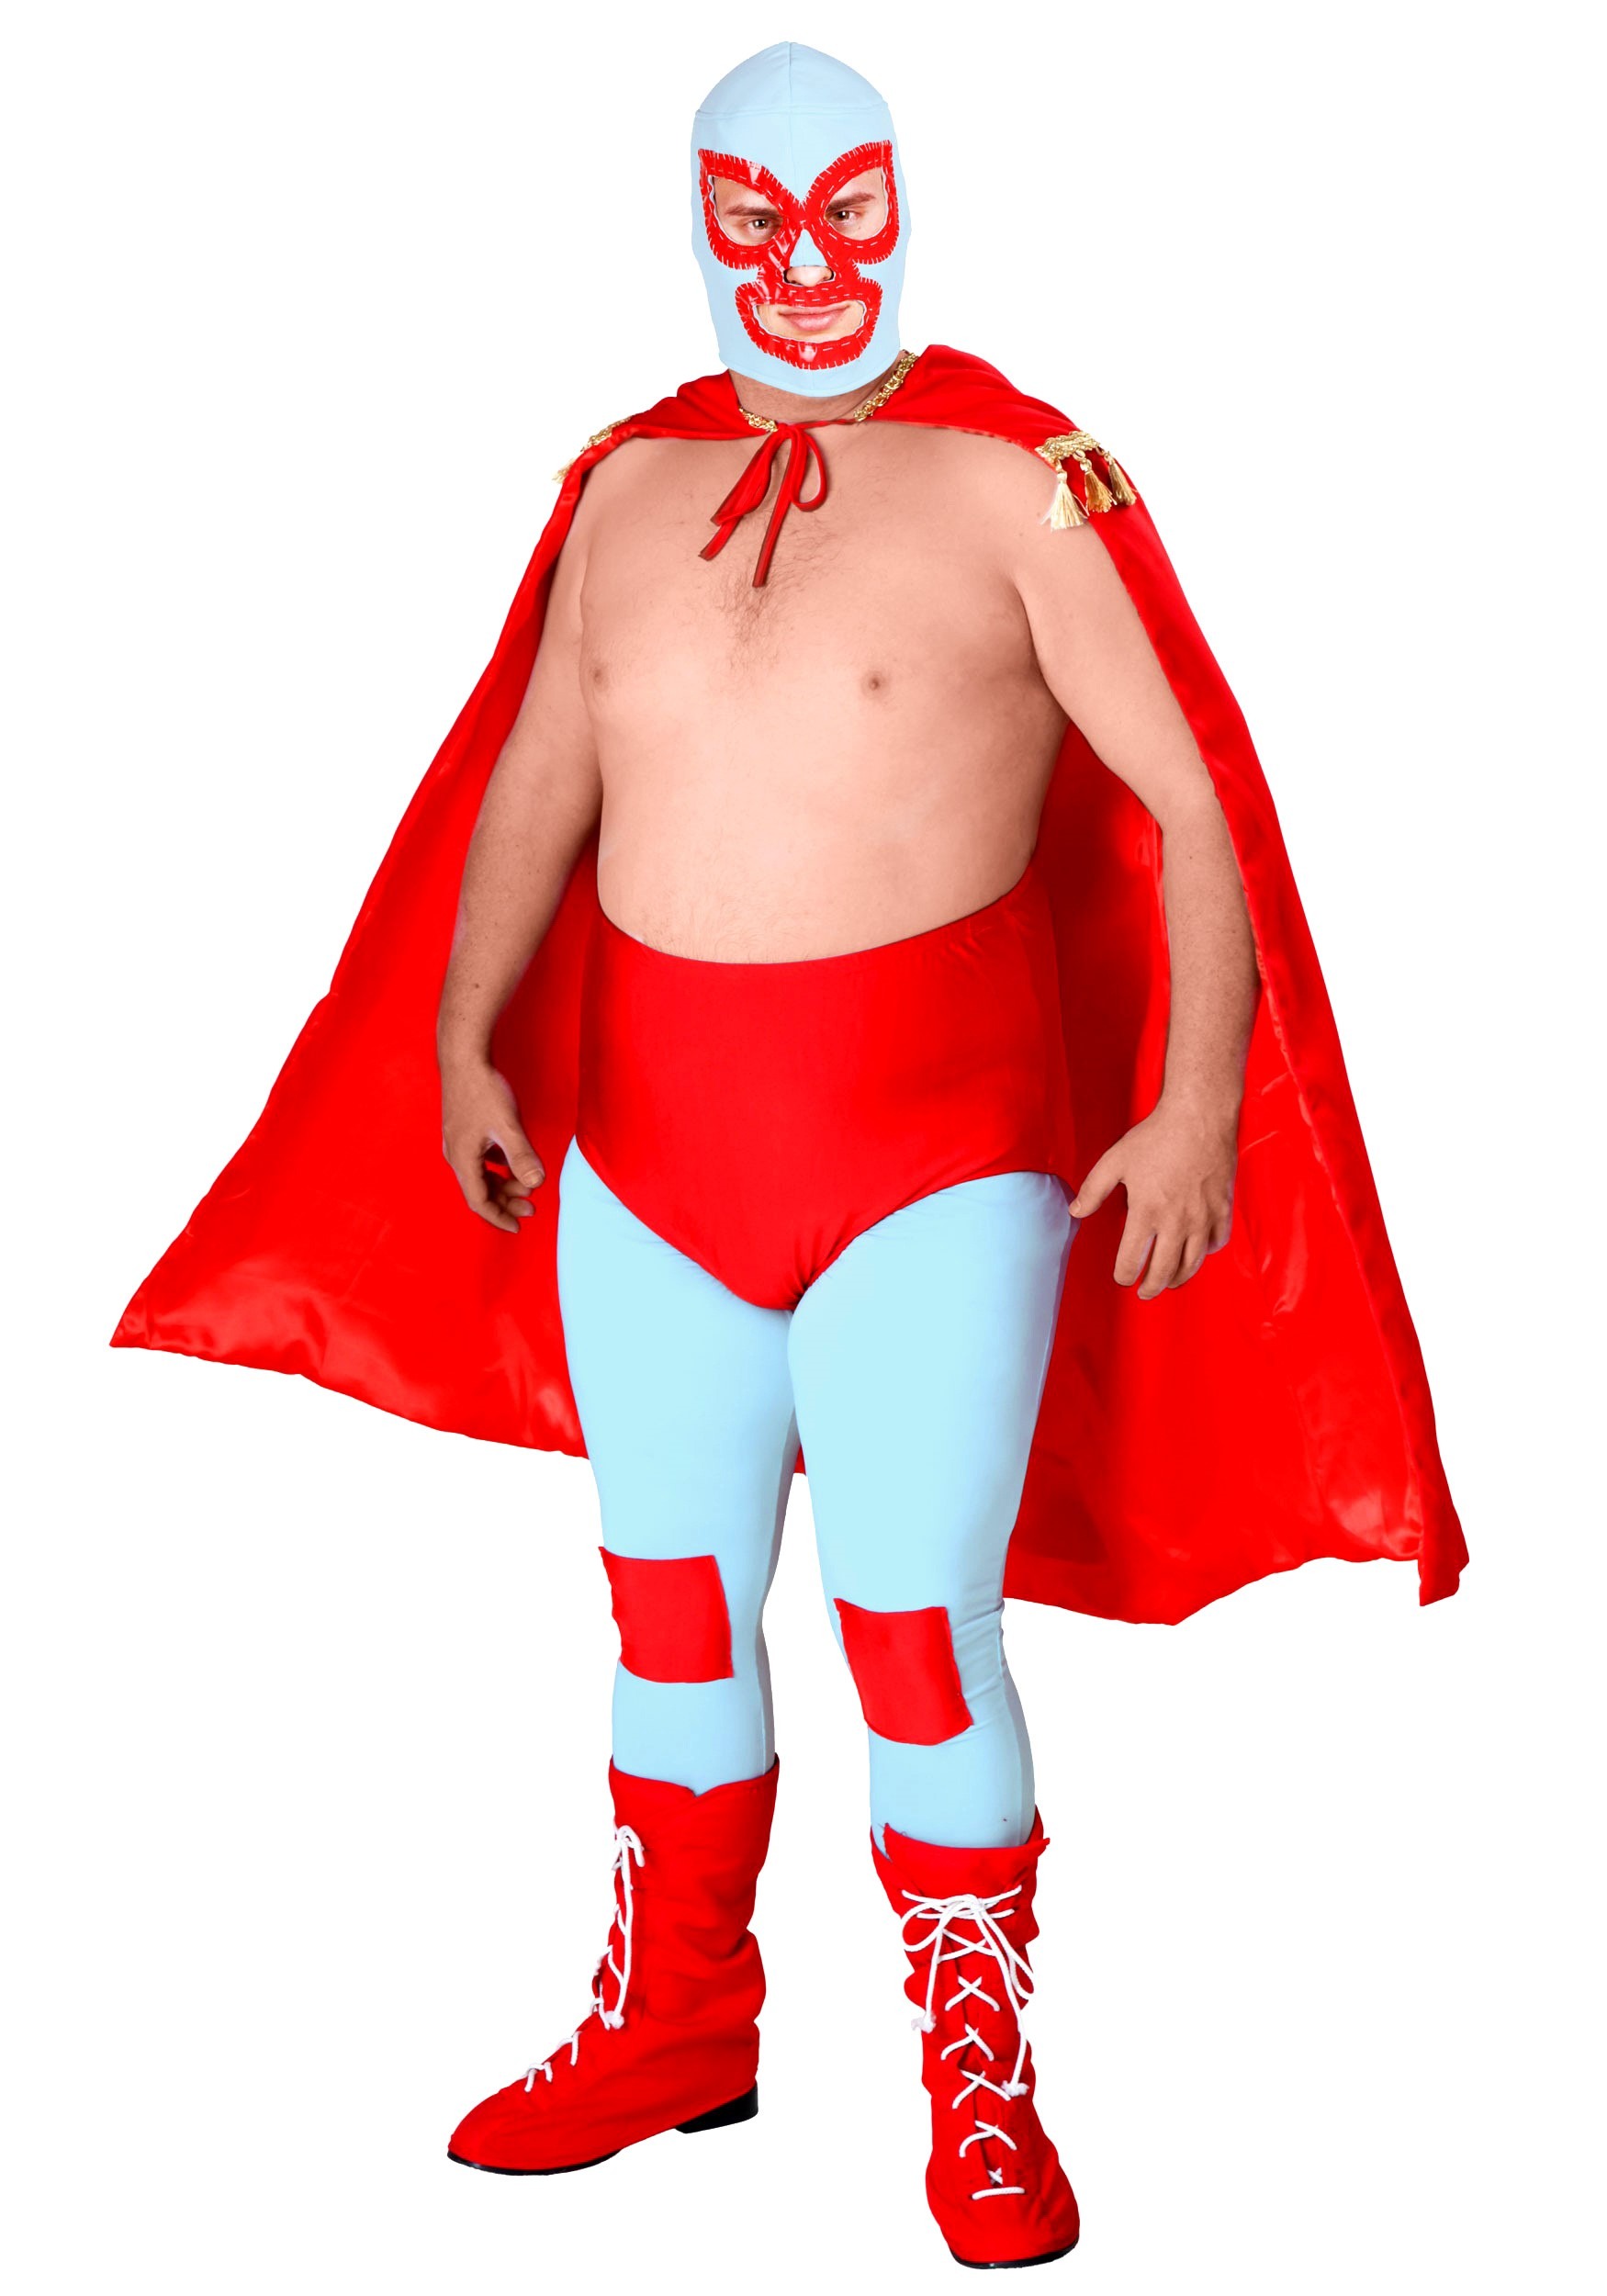 Photos - Fancy Dress FUN Costumes Nacho Libre Costume for Adult's | Wrestling Halloween Costume